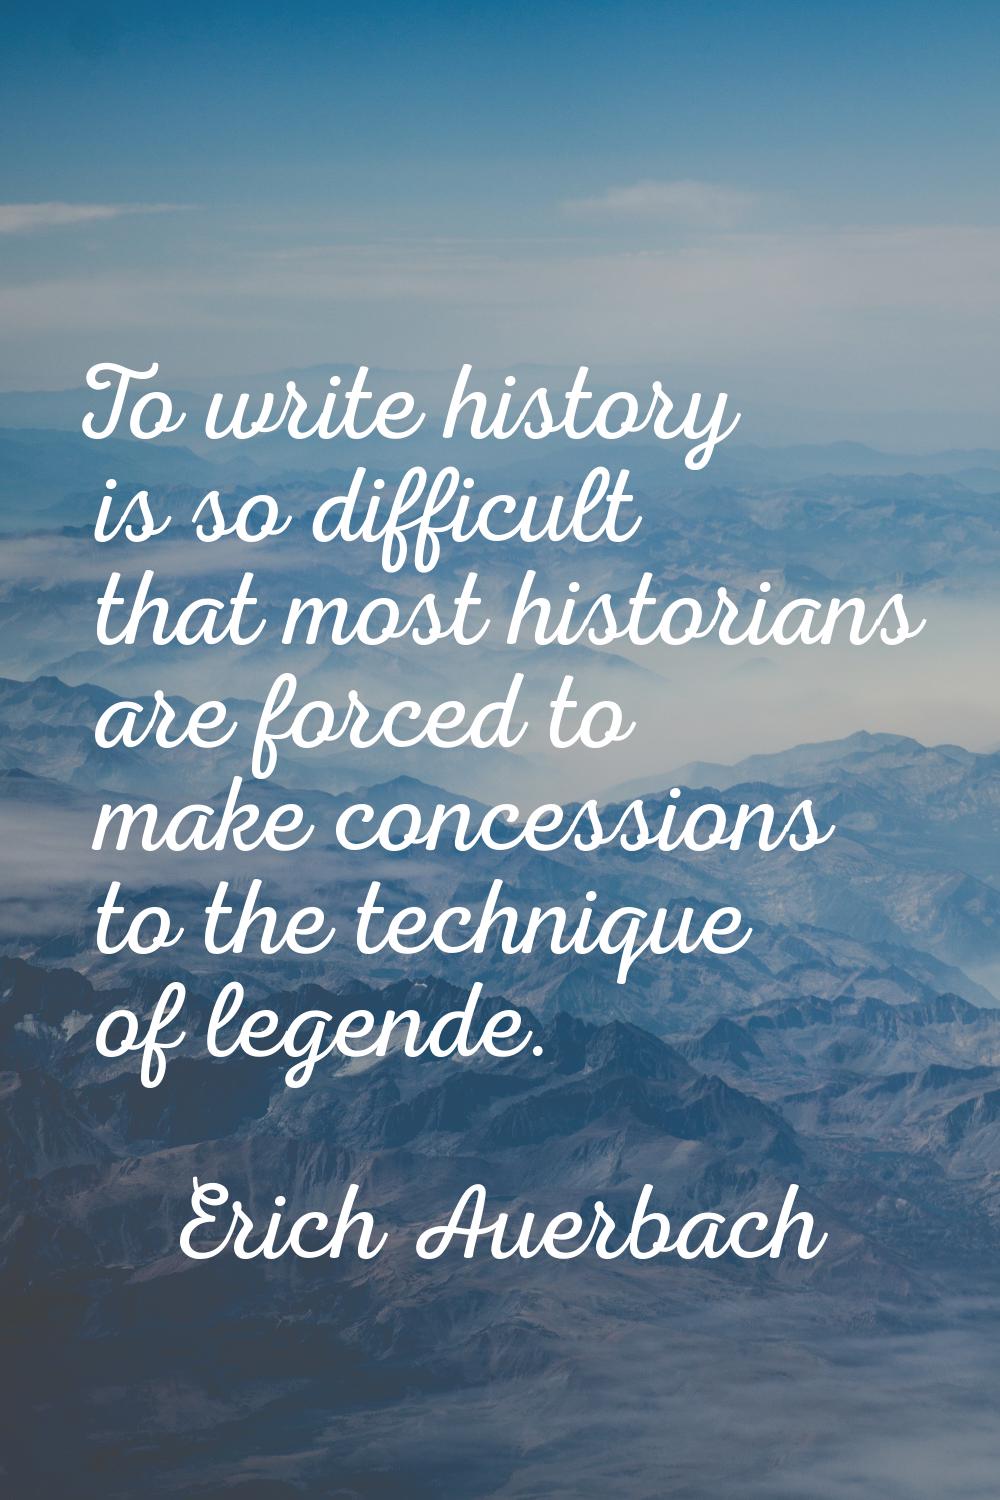 To write history is so difficult that most historians are forced to make concessions to the techniq